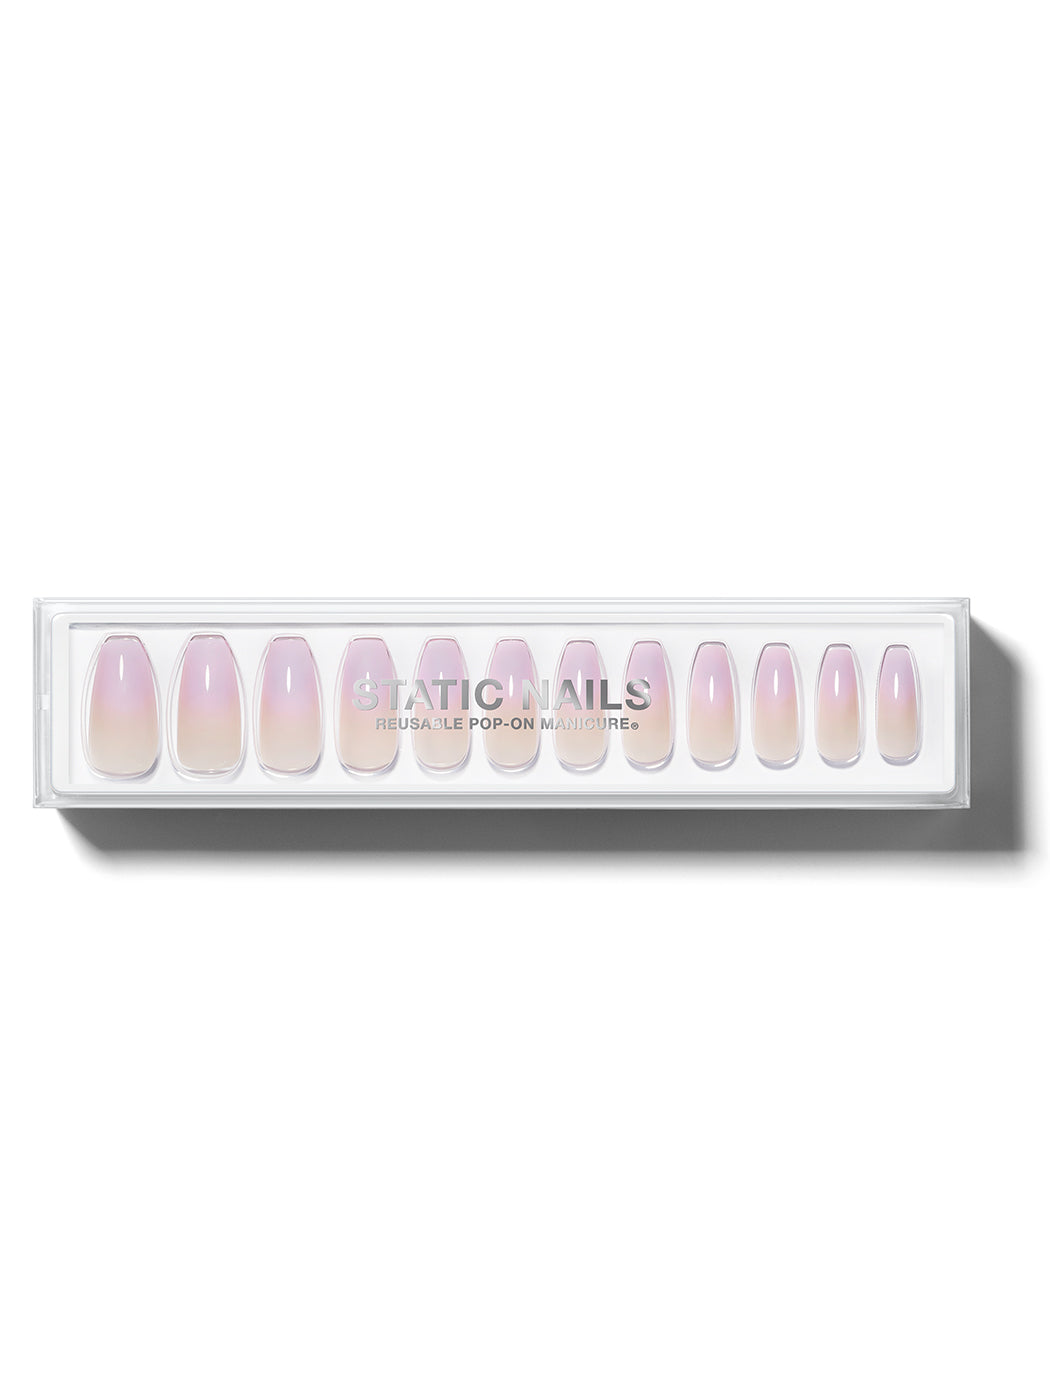 Pink to lavender ombre french manicure in long coffin shape,